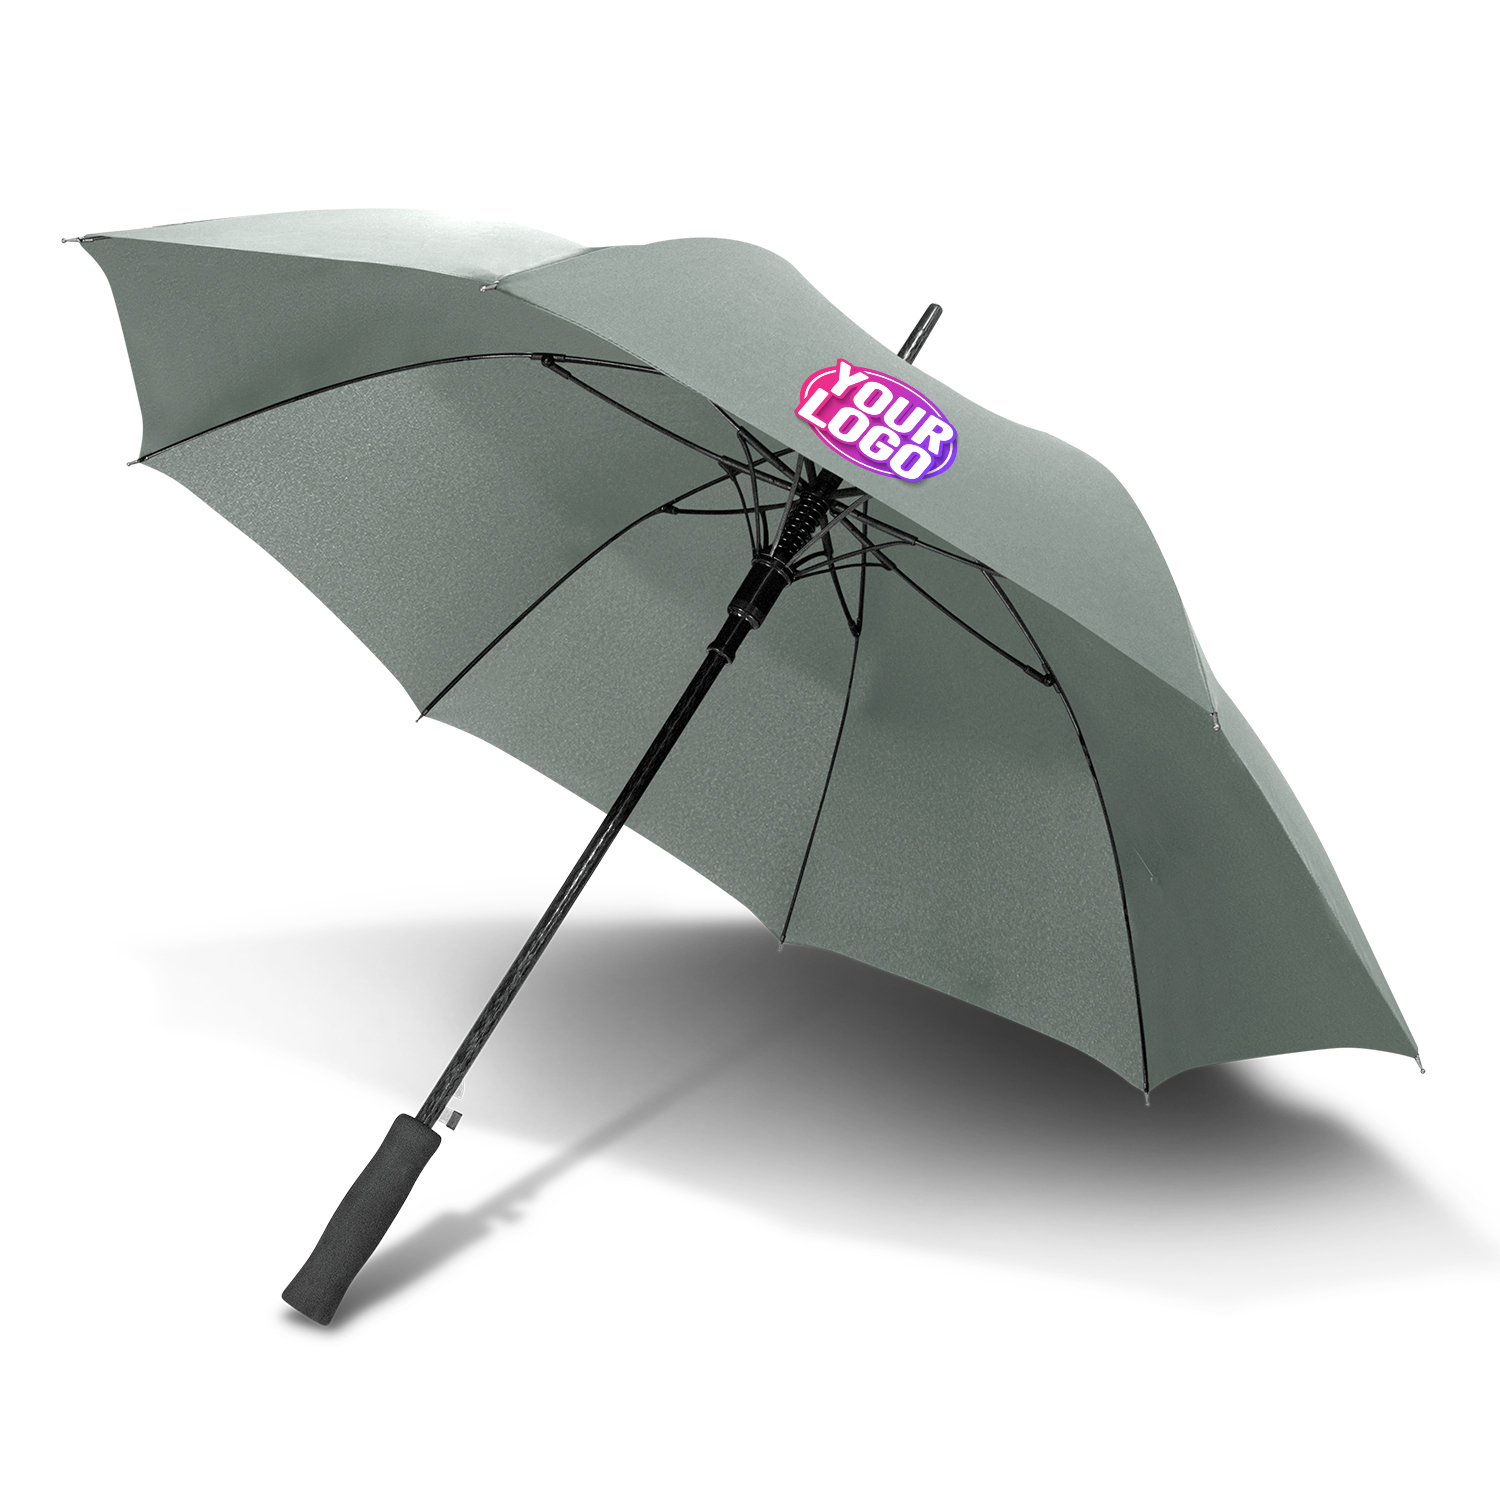 CUSTOM BRANDED - STORMPROOF ULTIMATE®️ Heavy Duty Personal Umbrella With Windproof Fibreglass Frame and Fibreglass Shaft - Premium Automatic Opening